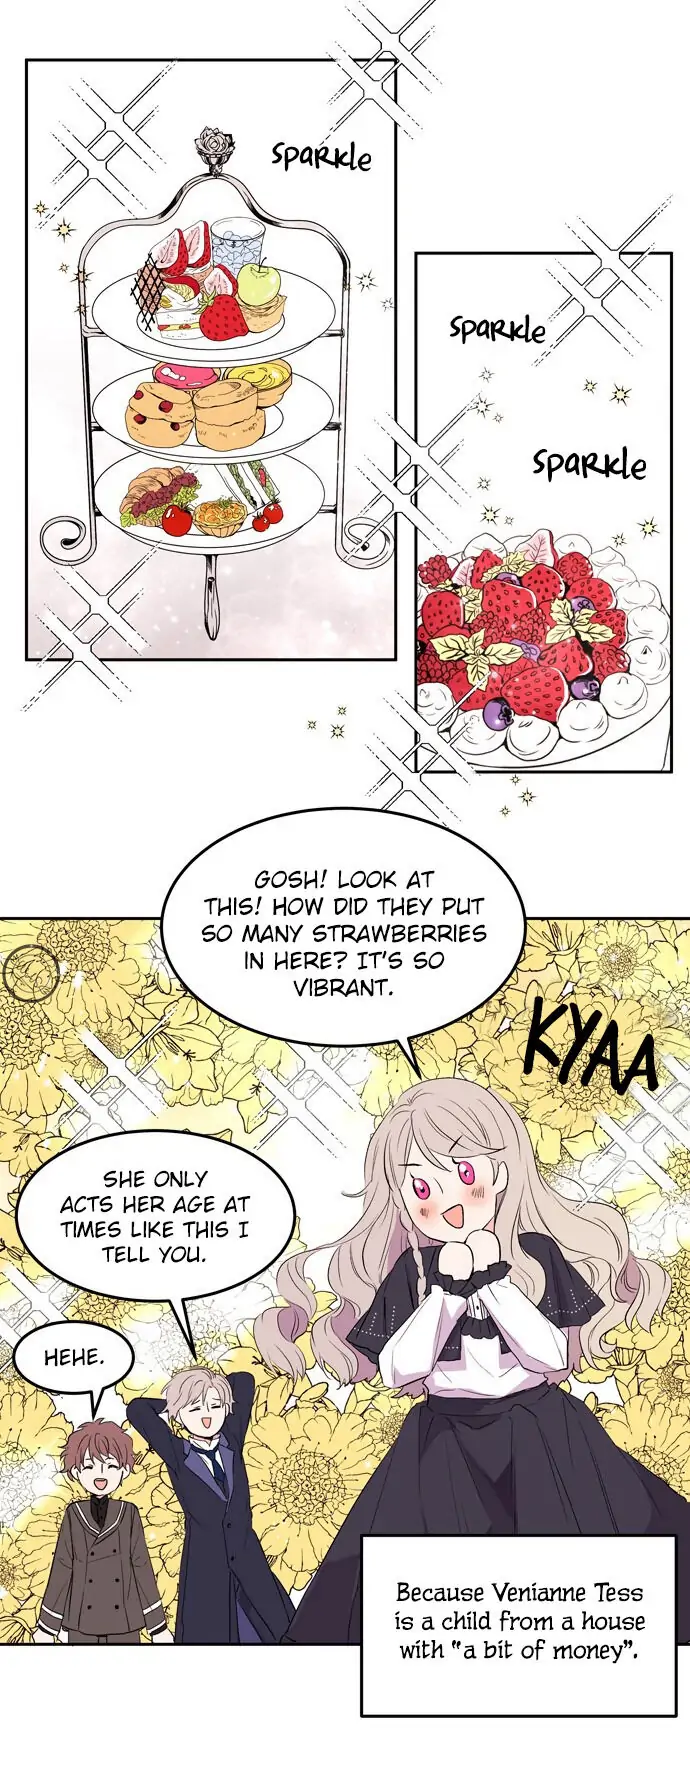 The Garden of Red Flowers chapter 1